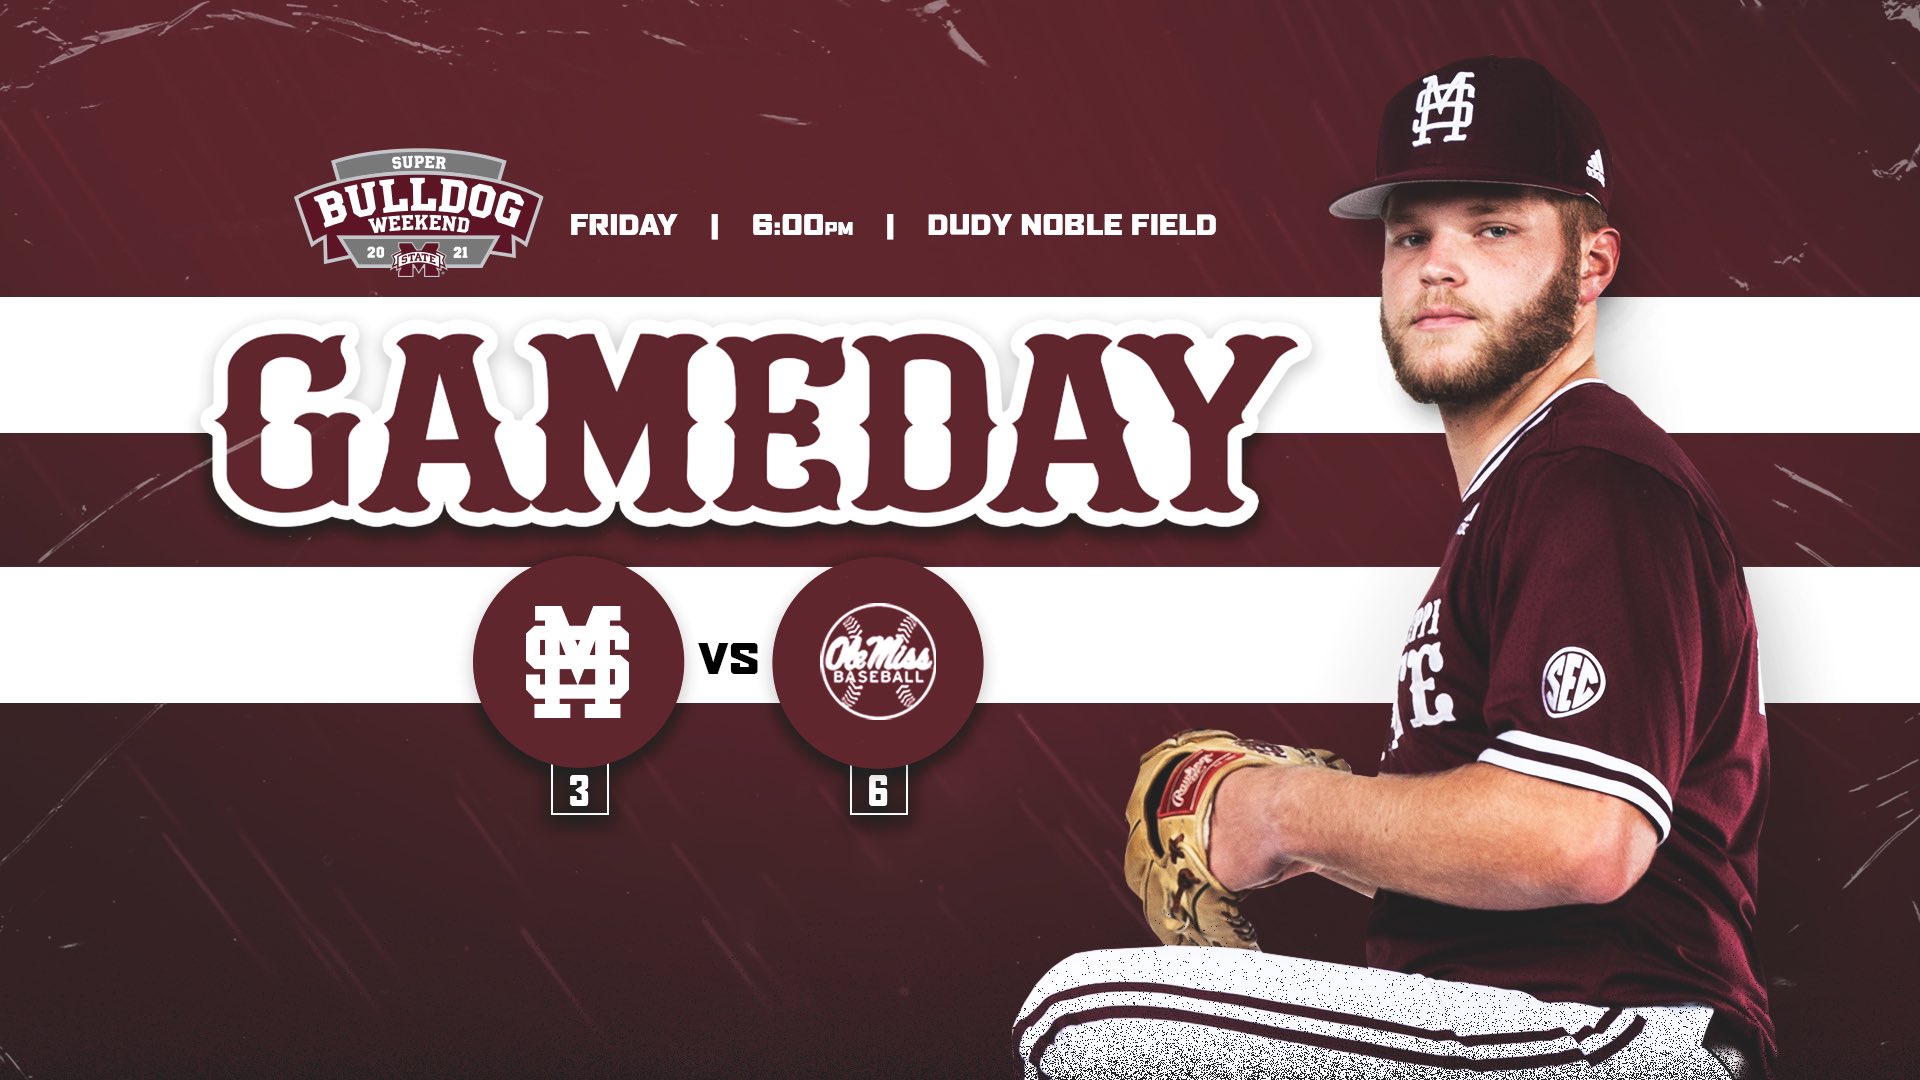 Maroon gameday graphic with image of an MSU baseball player wearing a baseball glove while looking at the camera